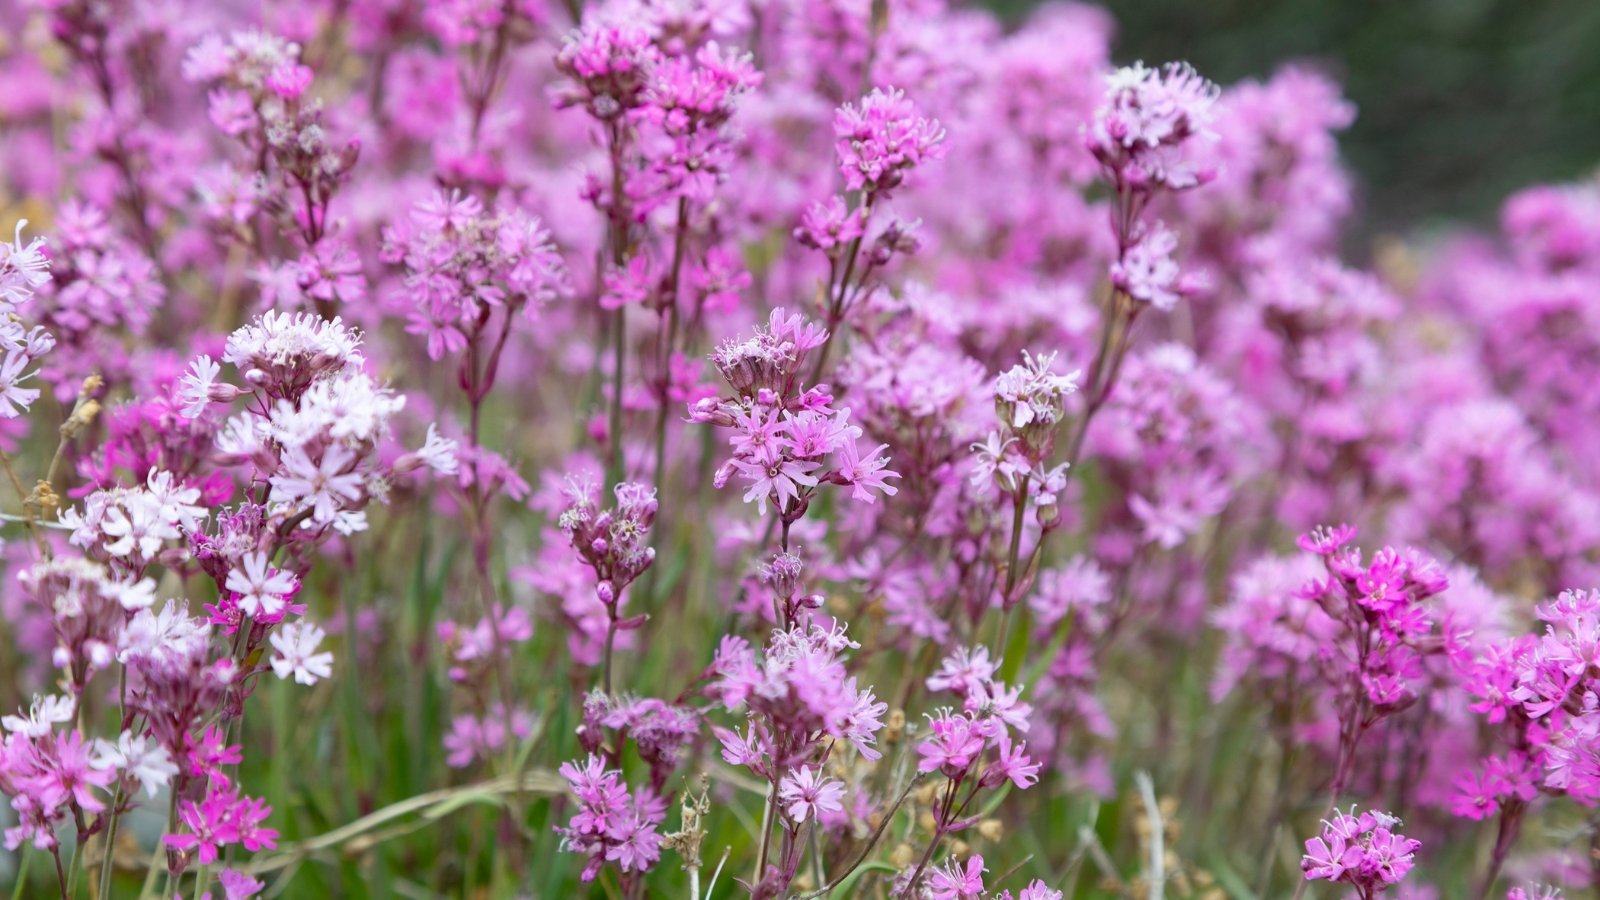 Purple sticky catchfly blossoms, stretching towards the sky, adorn the landscape with their striking hue and delicate petals, a testament to nature's intricate beauty and resilience.